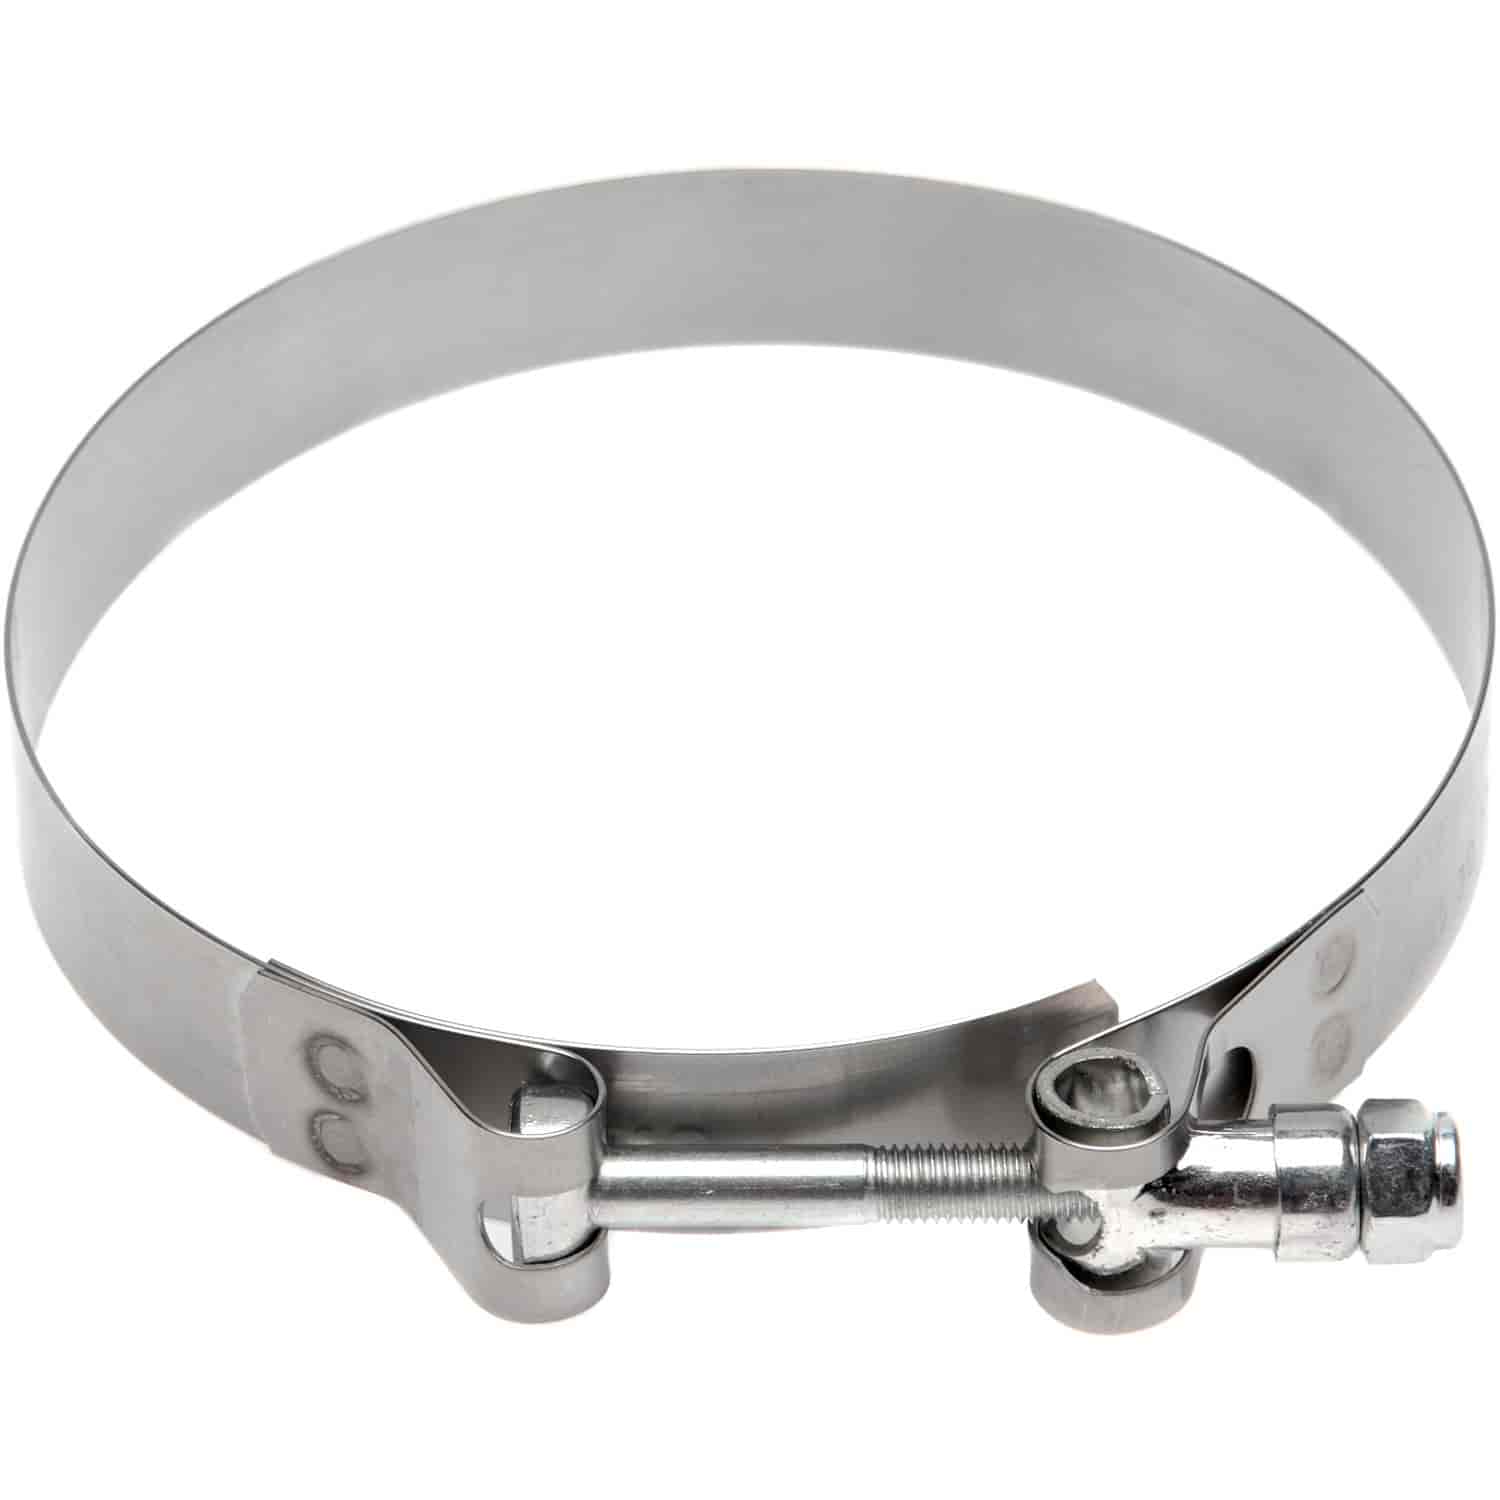 T-Bolt Hose Clamp [3.688 in. to 3.375 in. Outside Diameter]